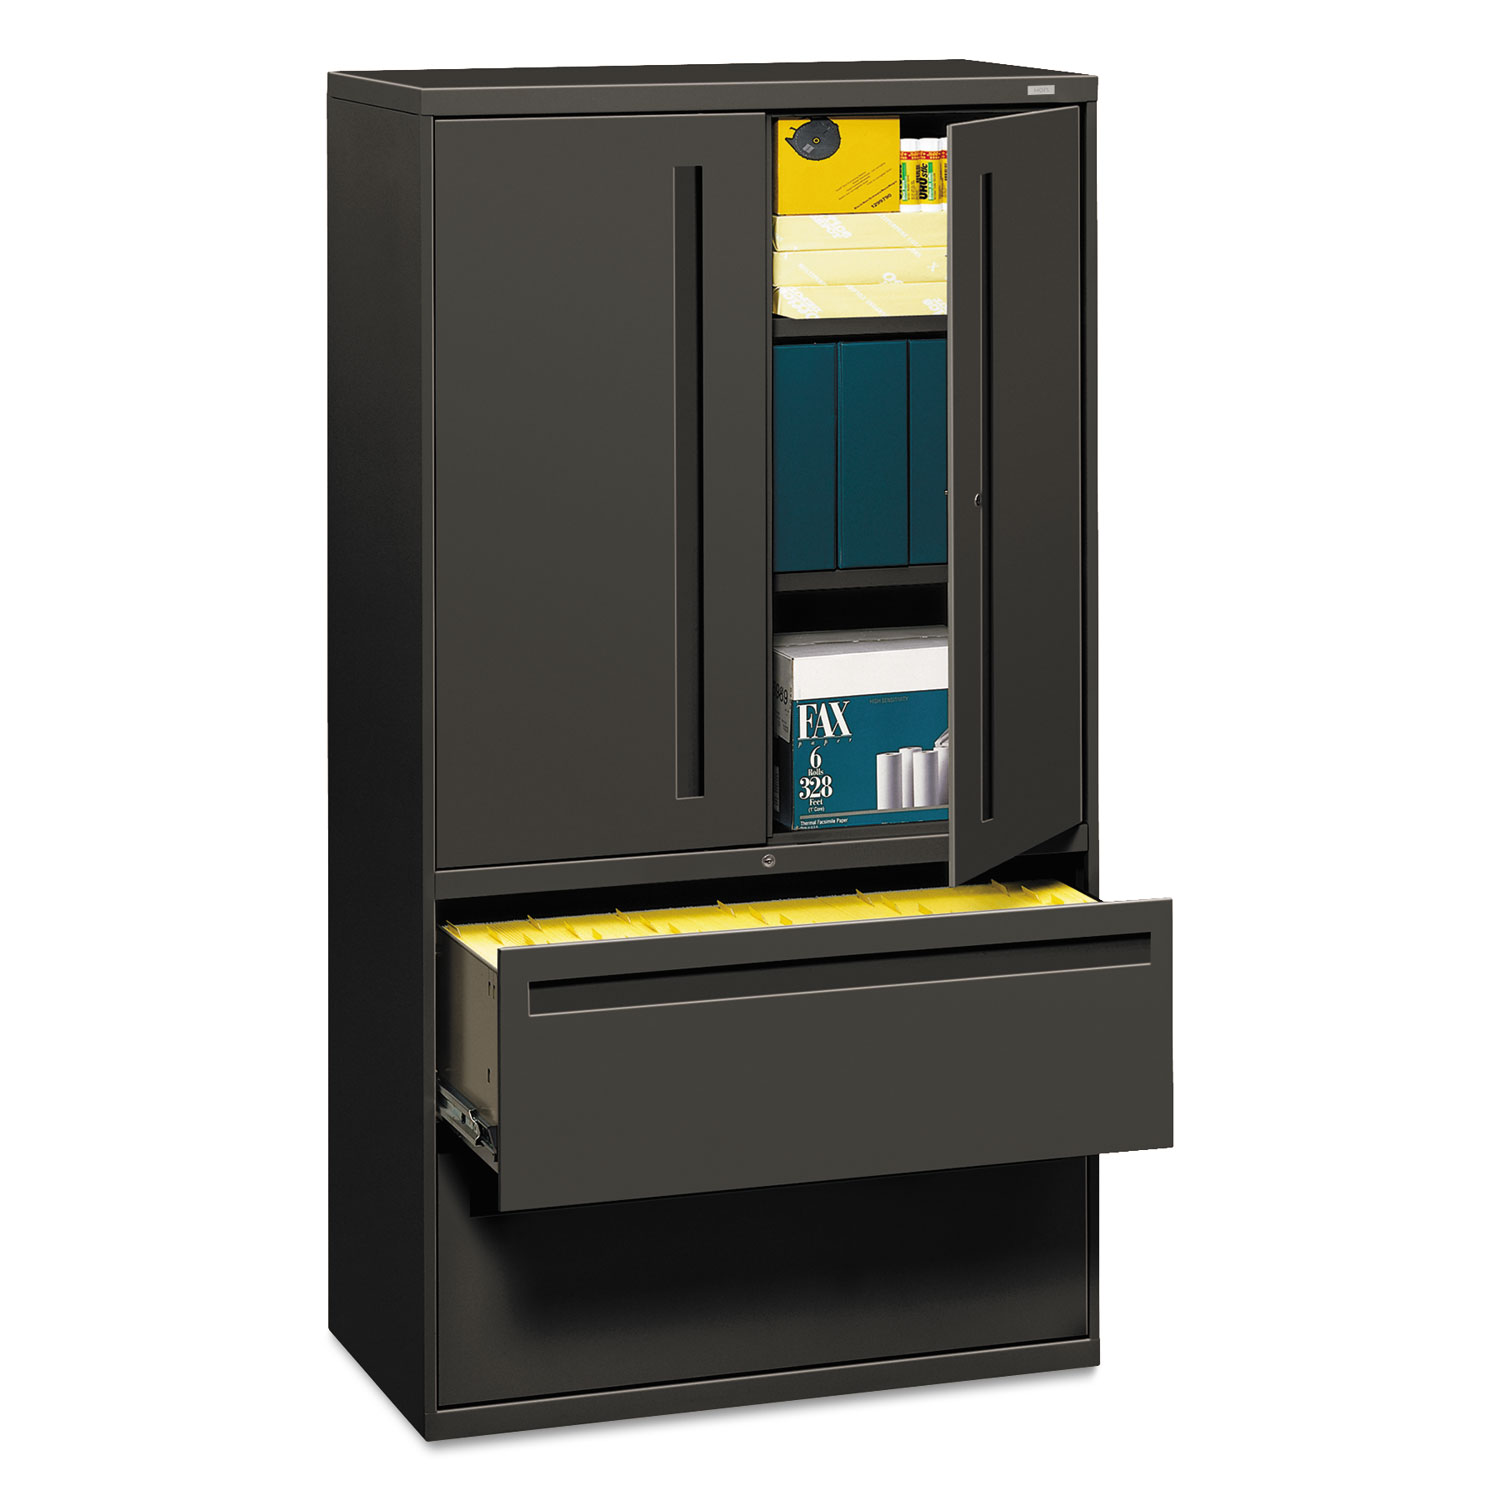 700 Series Lateral File w/Storage Cabinet, 36w x 19-1/4d, Charcoal